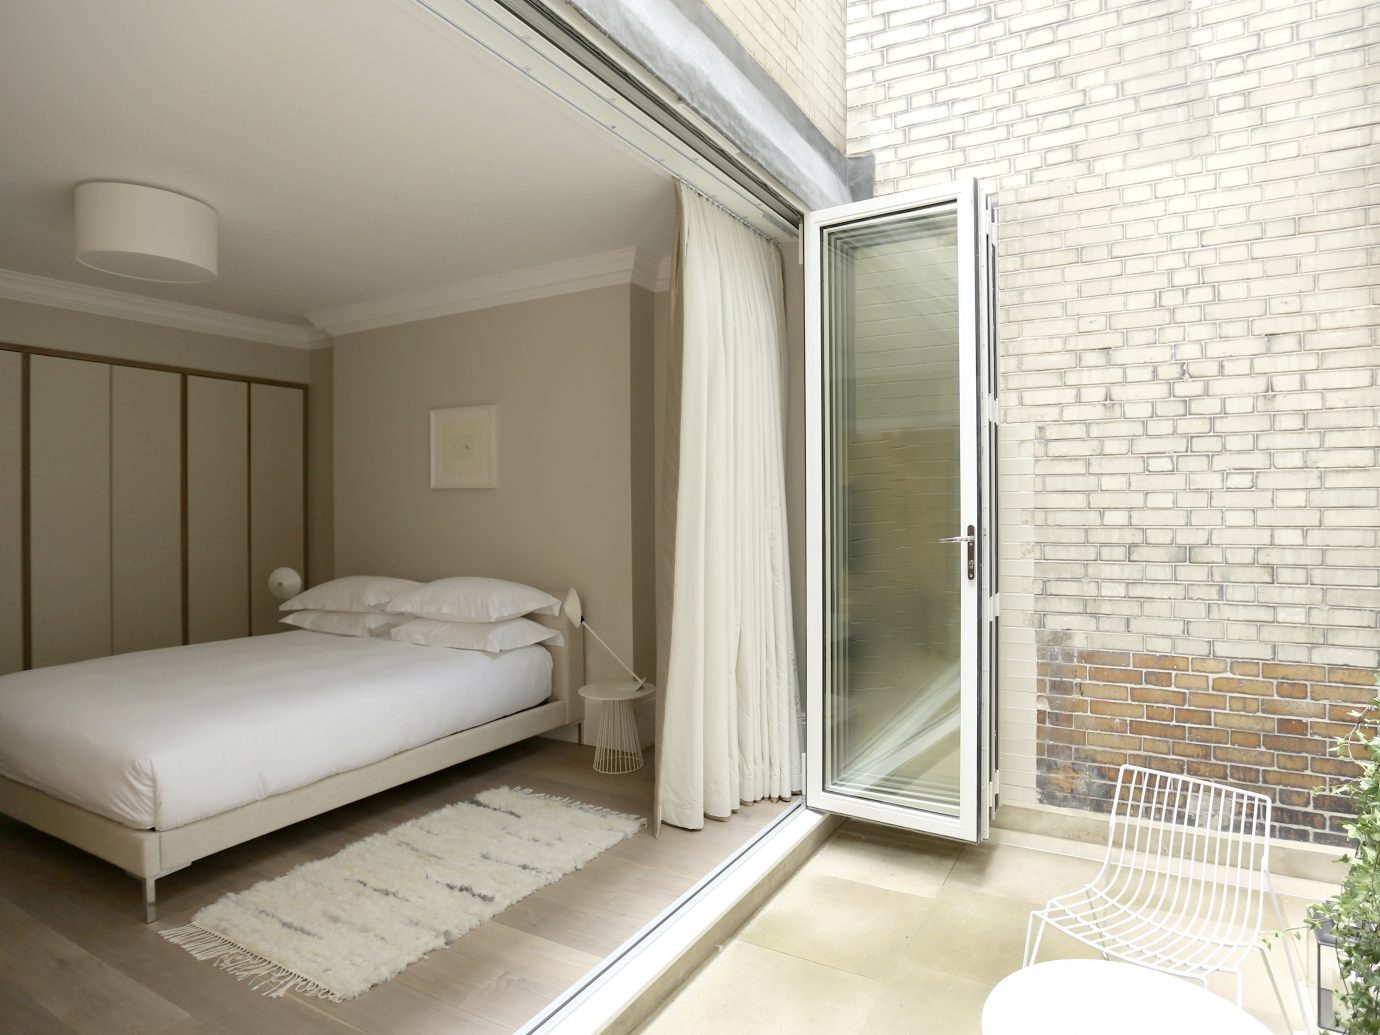 Bed open to outside at the Welbeck portion of the Living Rooms in London